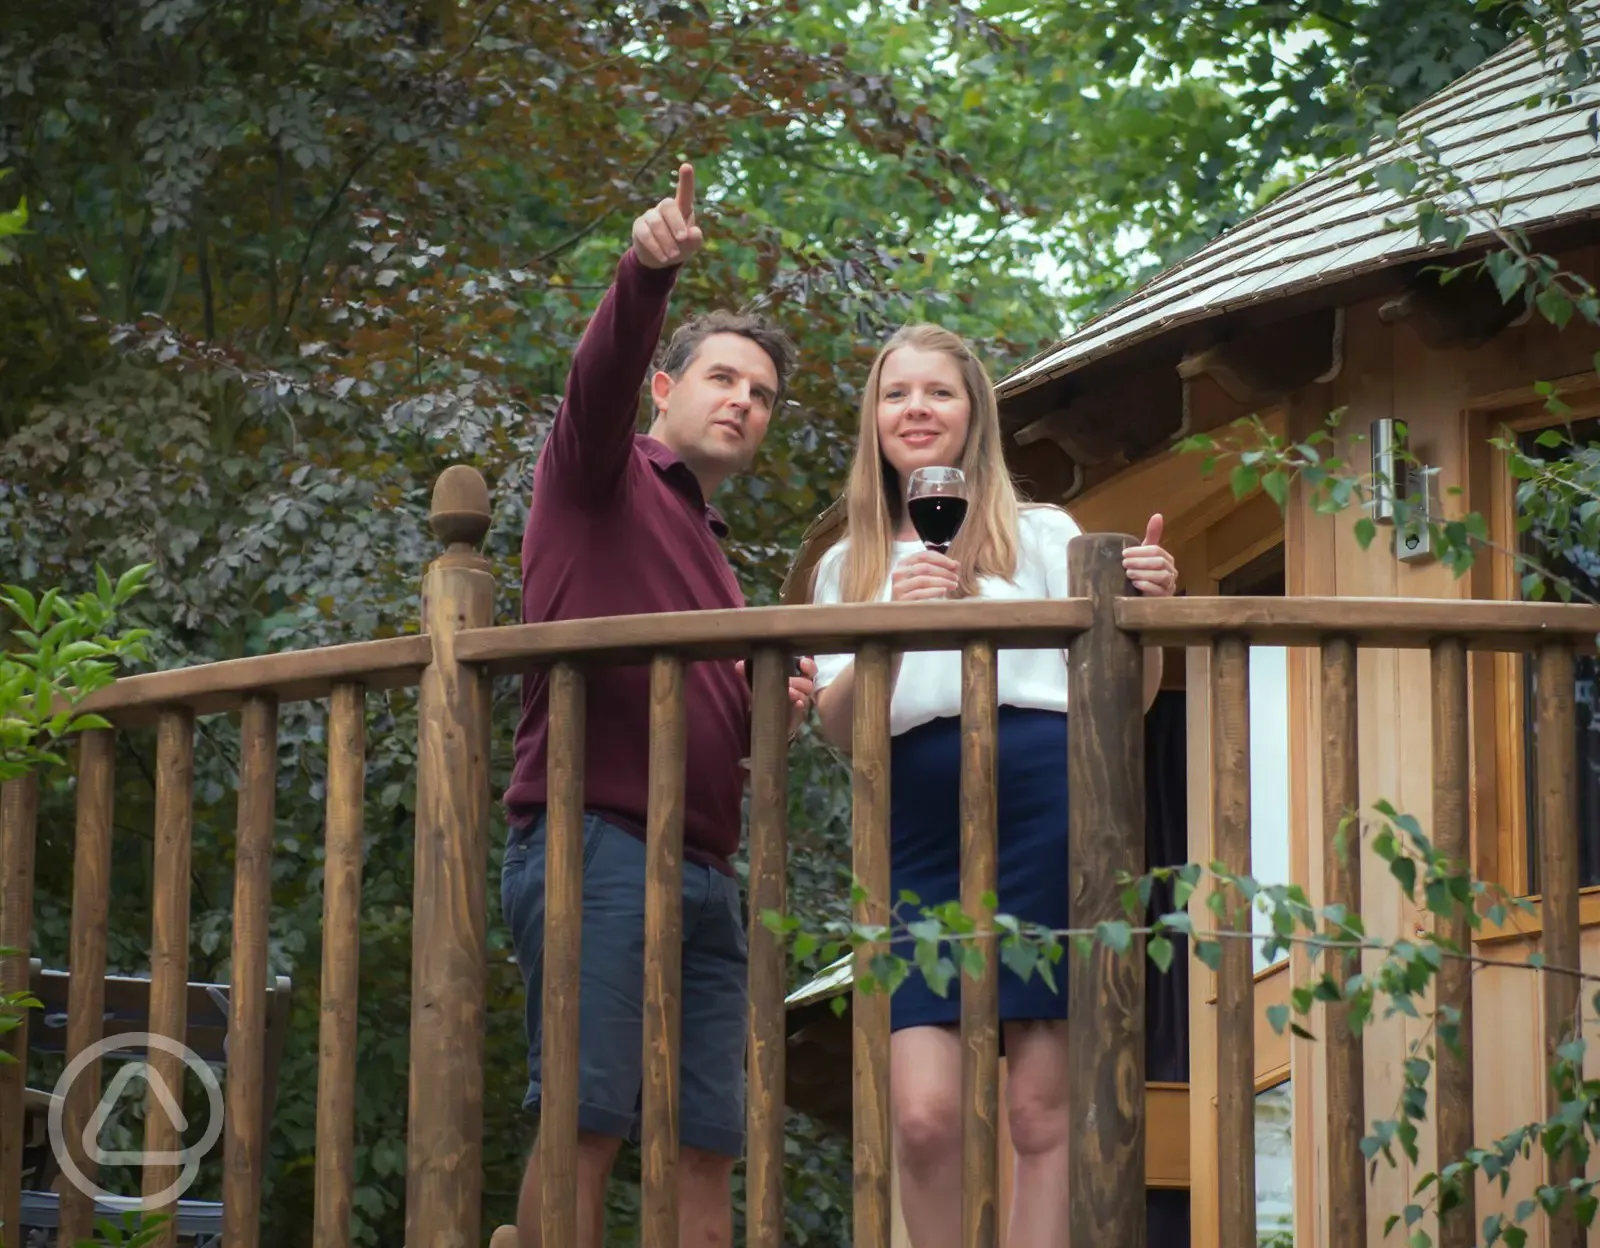 Romantic break spending time in the countryside at The Woodlands' luxury treehouse